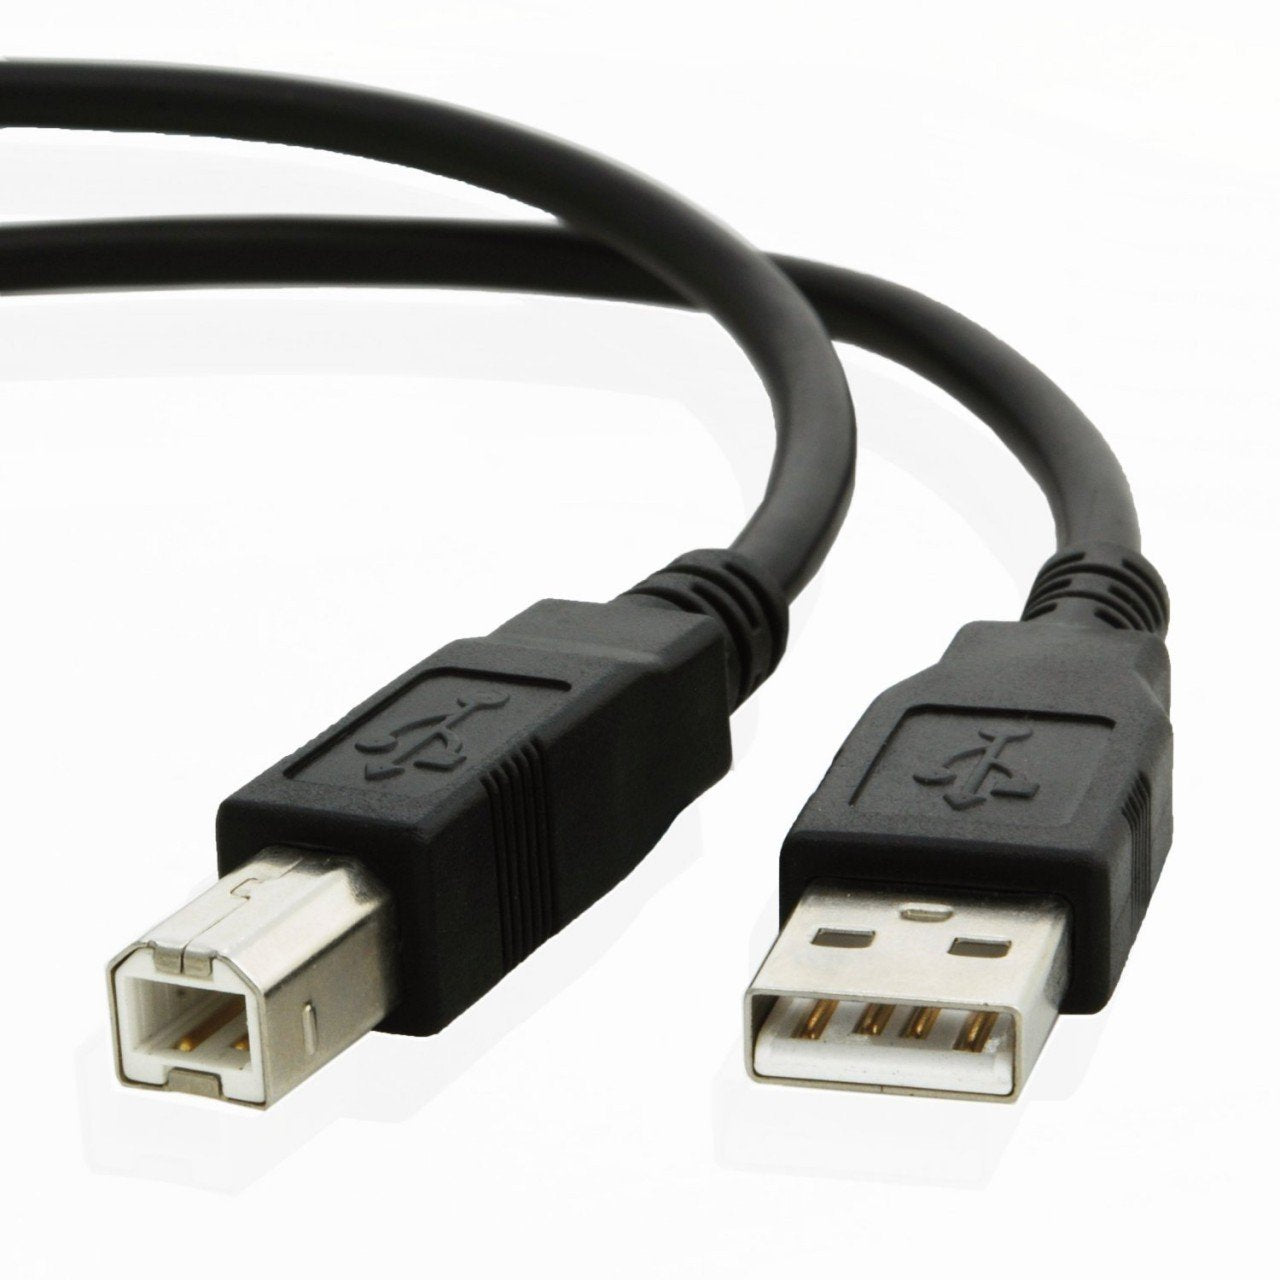 USB cable for Hp ENVY 7645